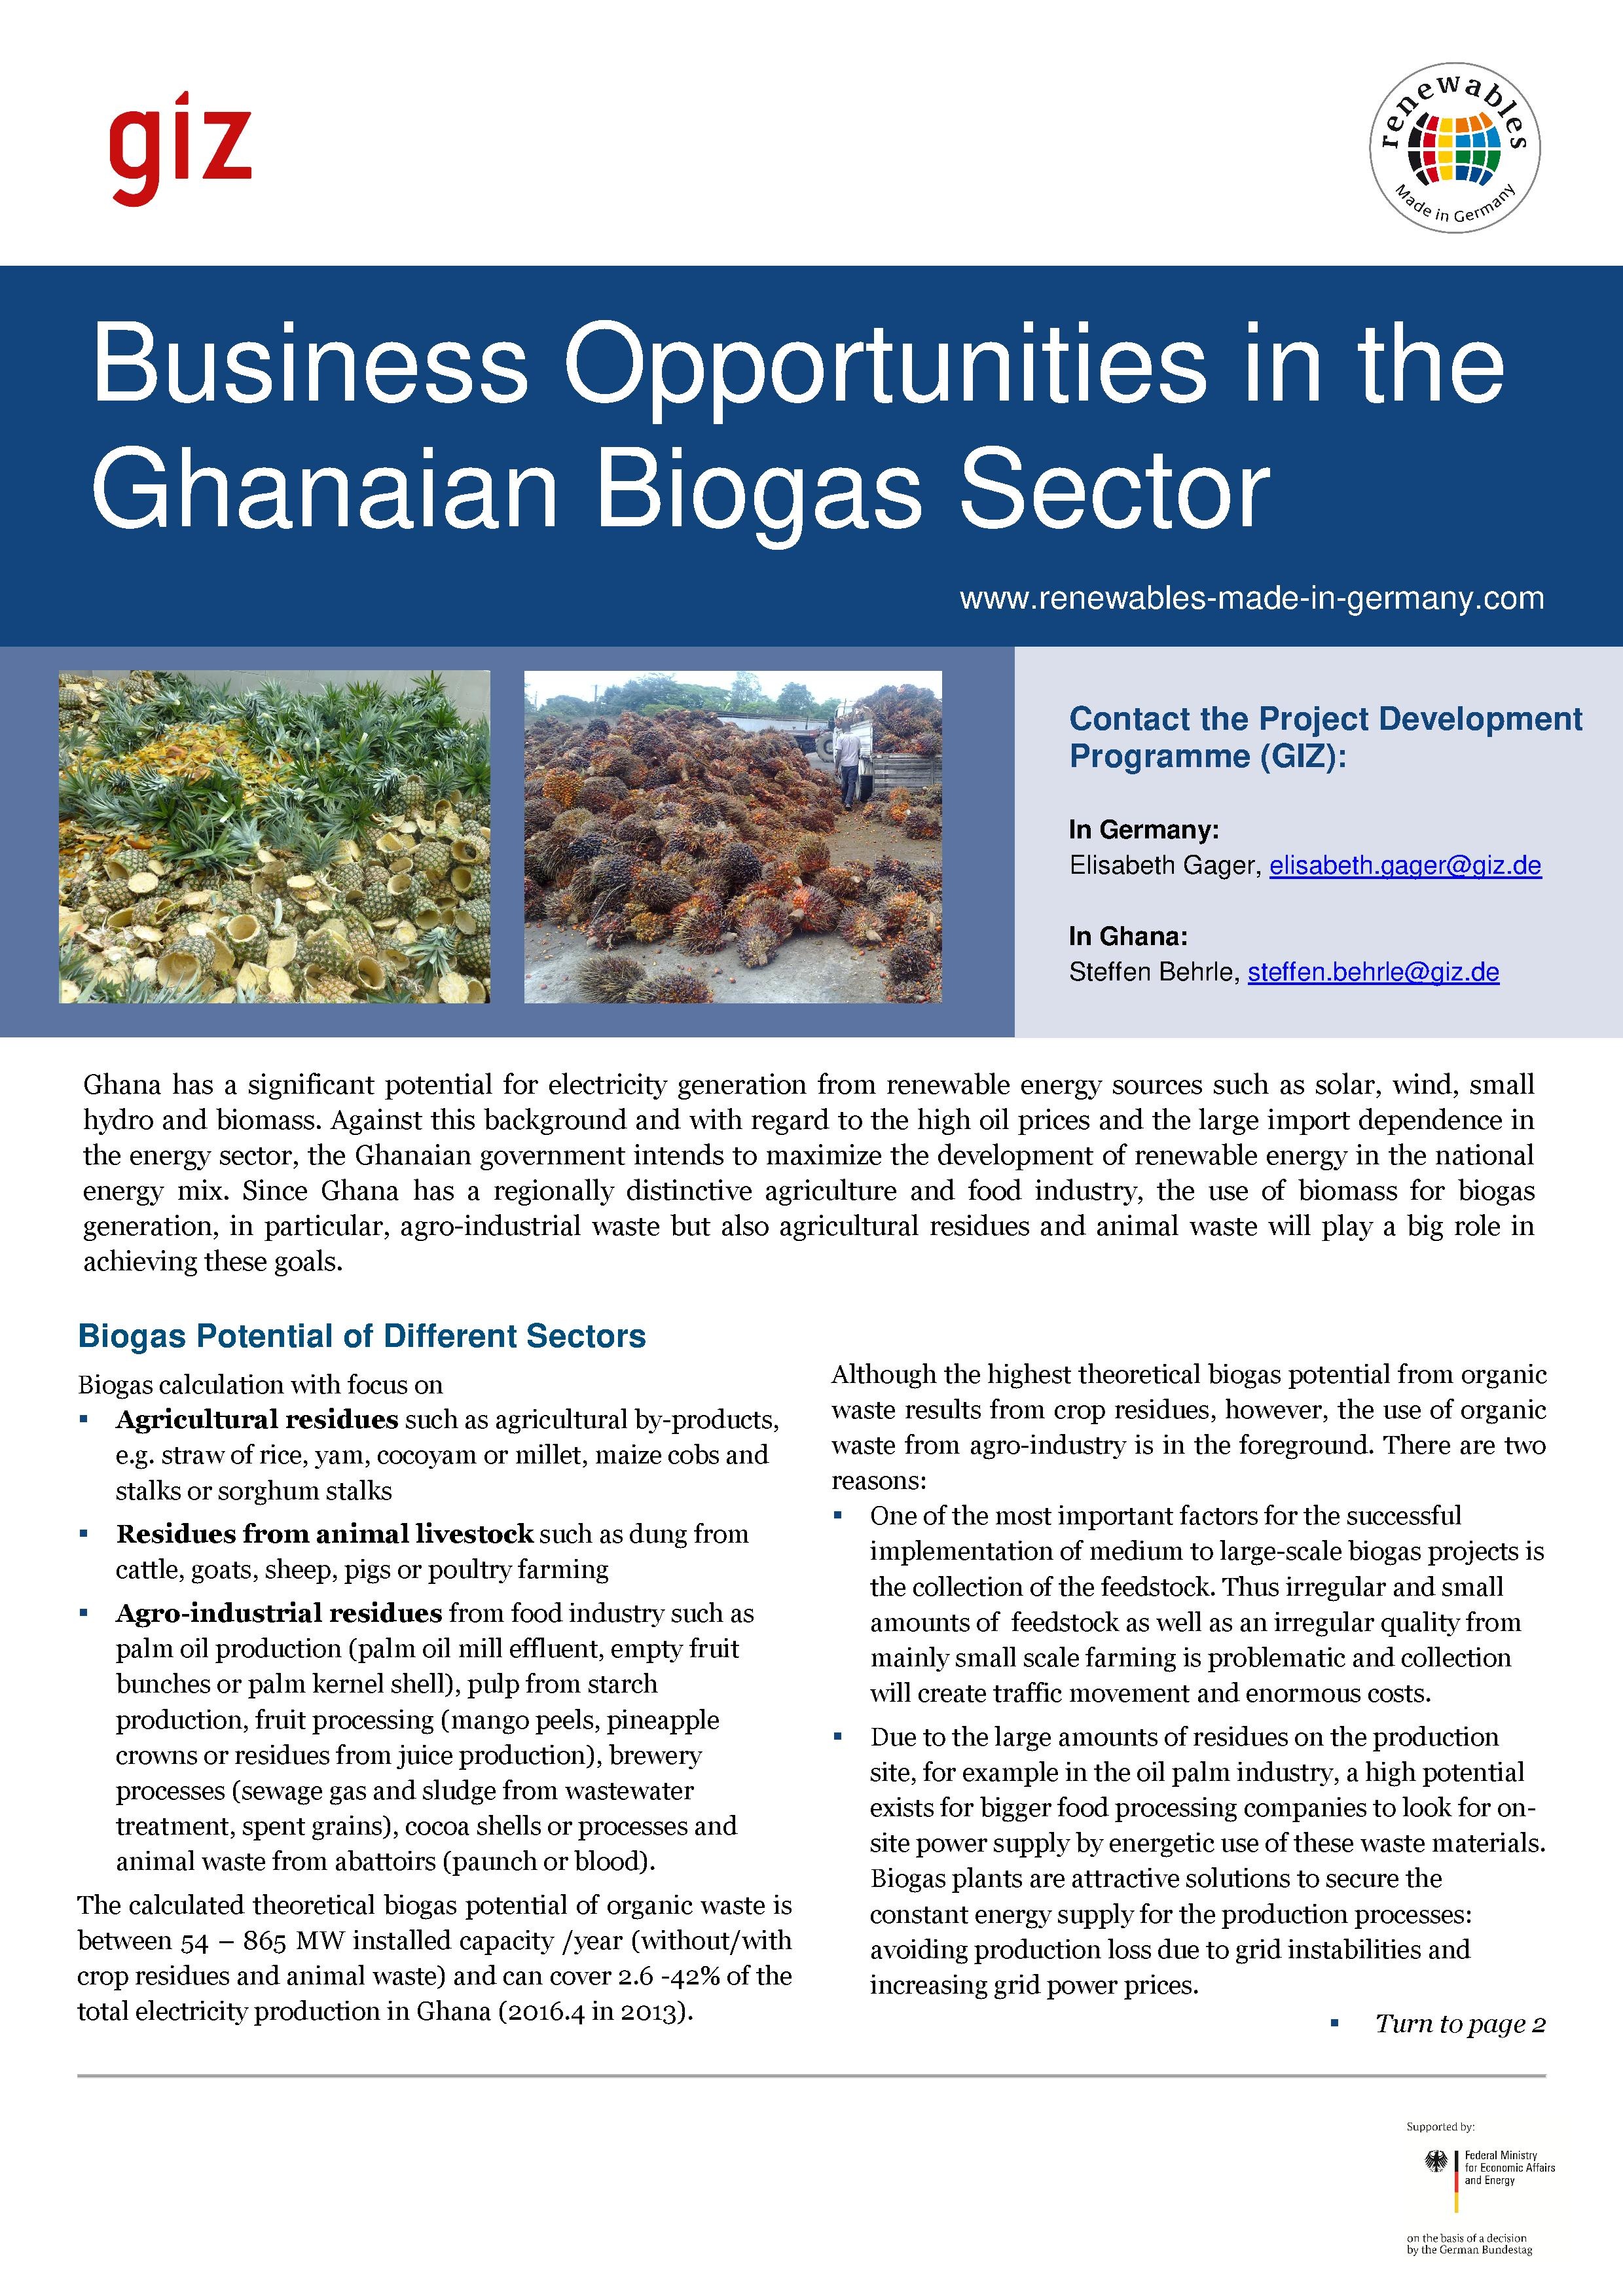 Business Opportunities in the Ghanaian Biogas Sector